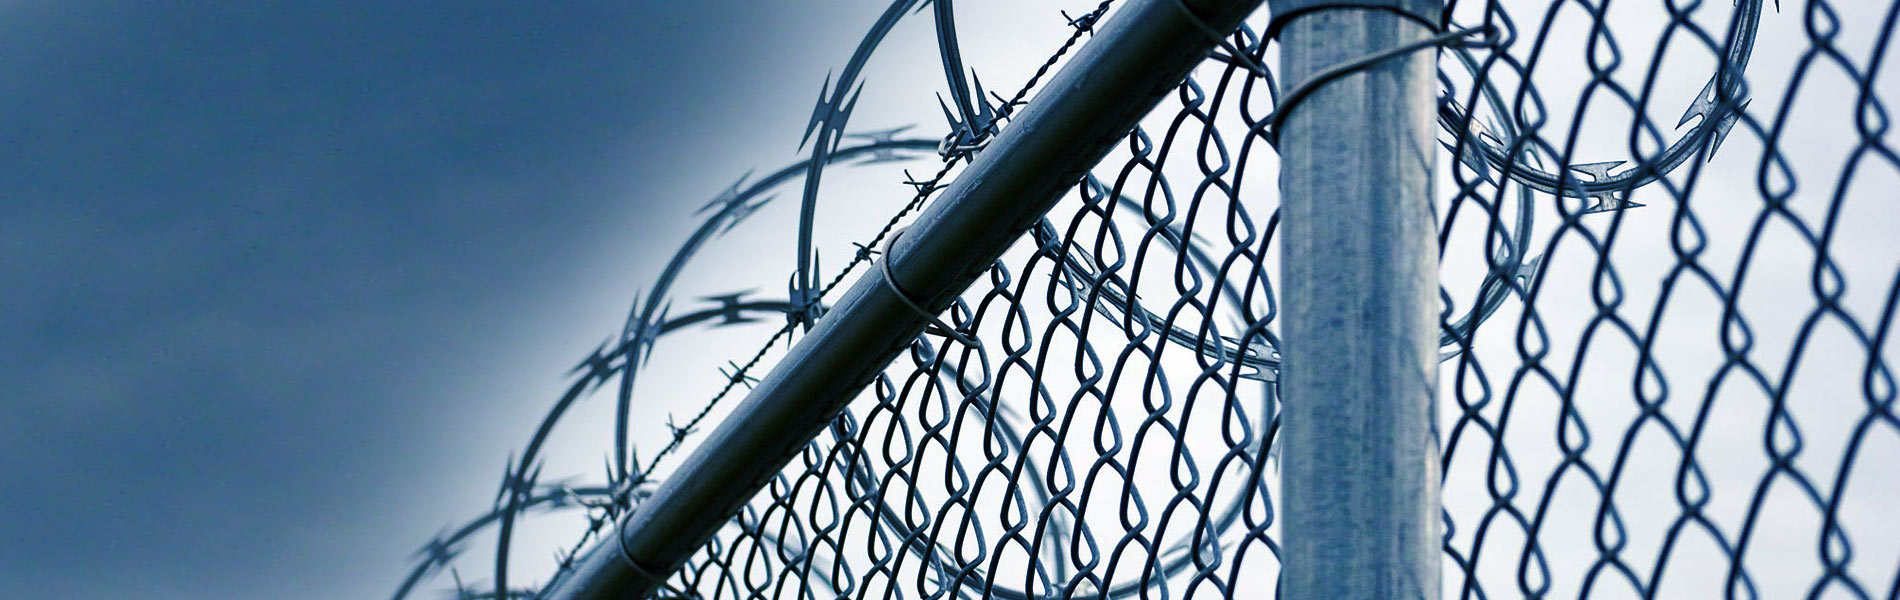 Combined General Security Barbed wire